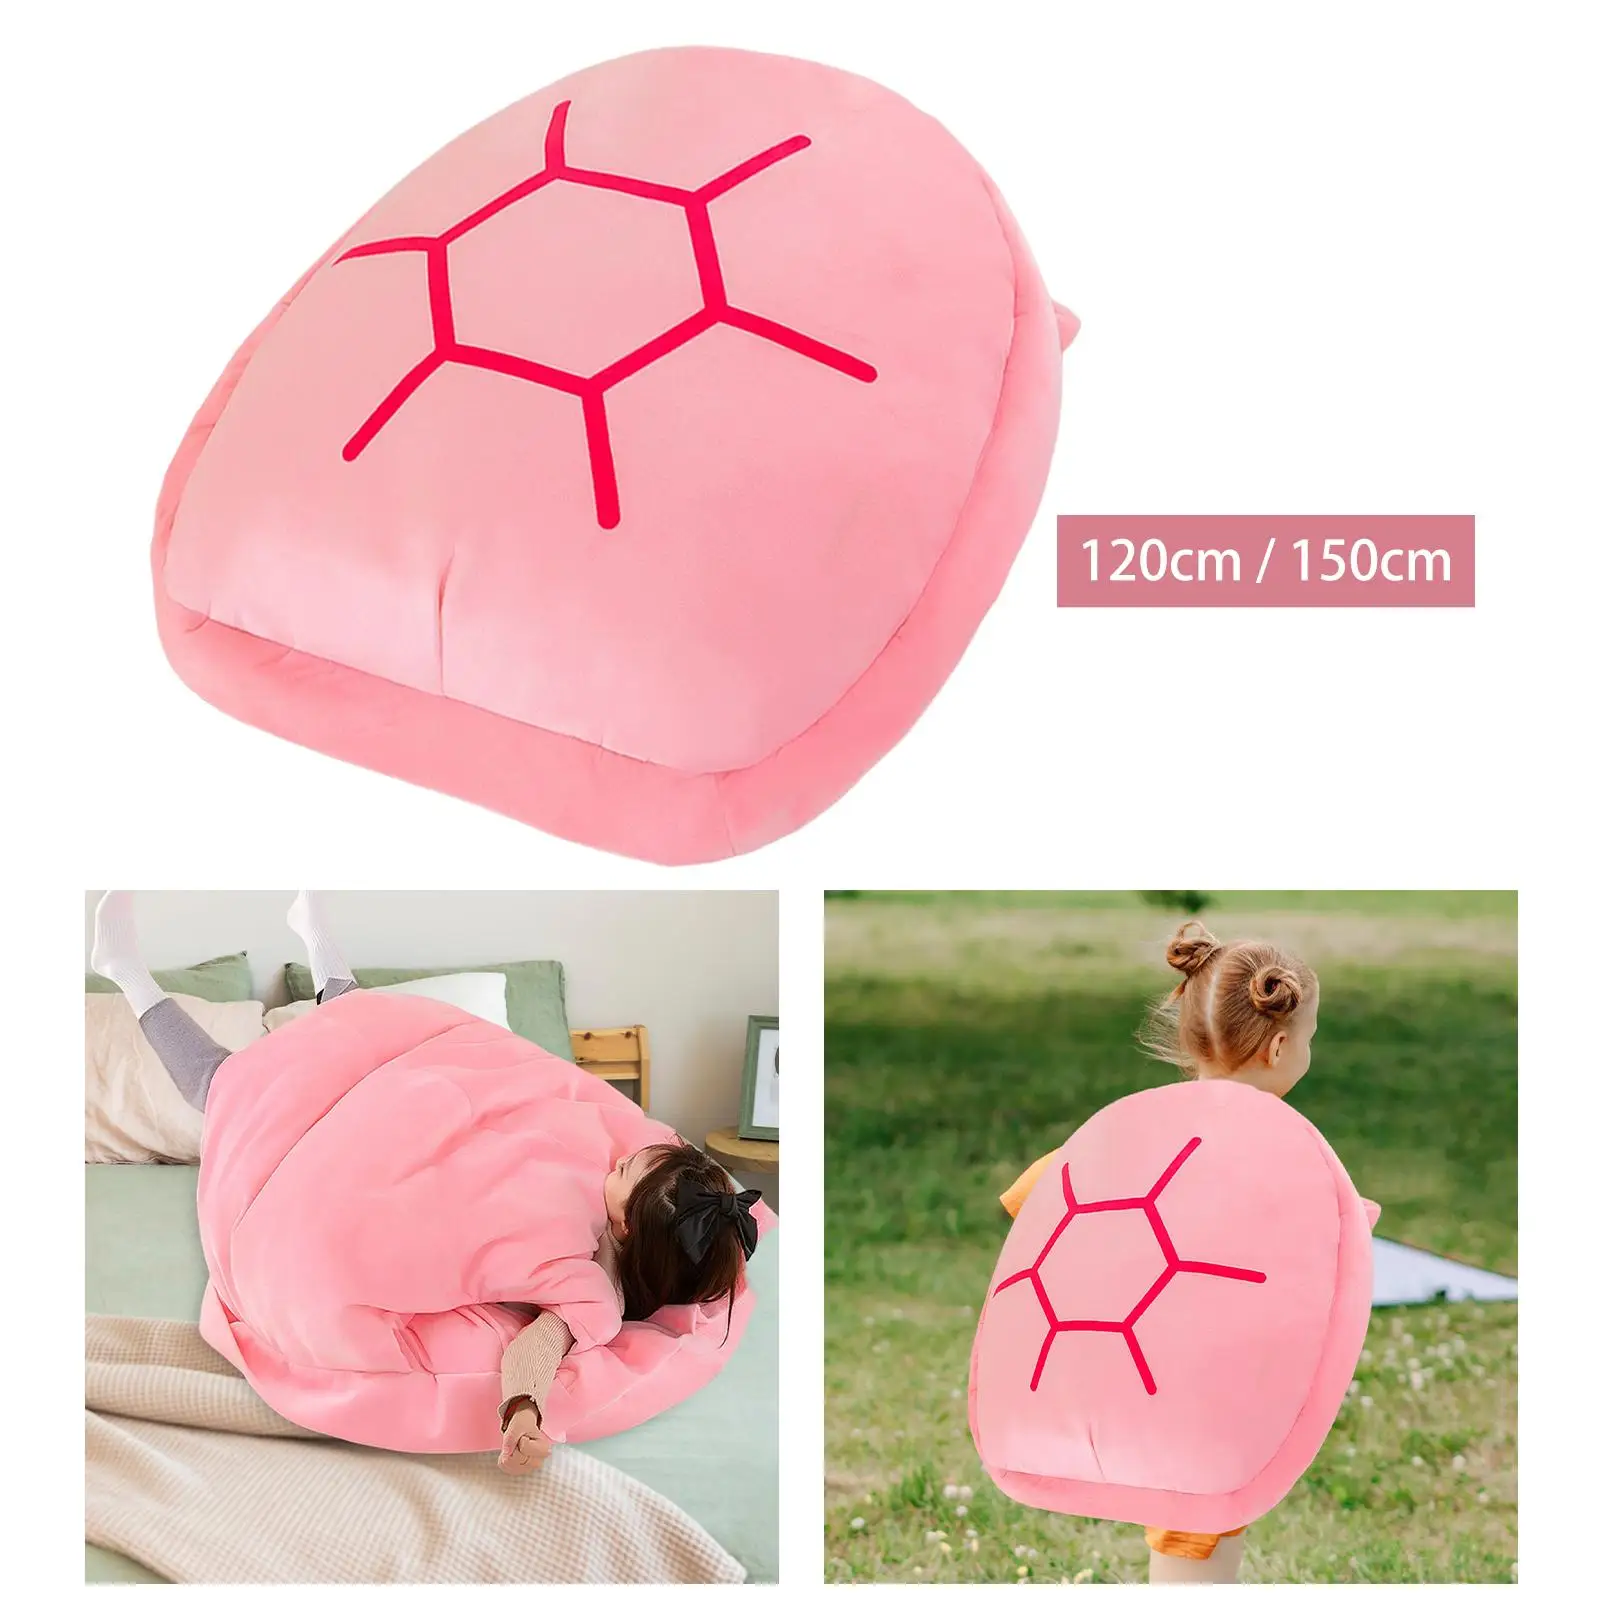 Wearable Turtle Shell Pillow Stuffed Animal Cushion for Gift for Kids Adults